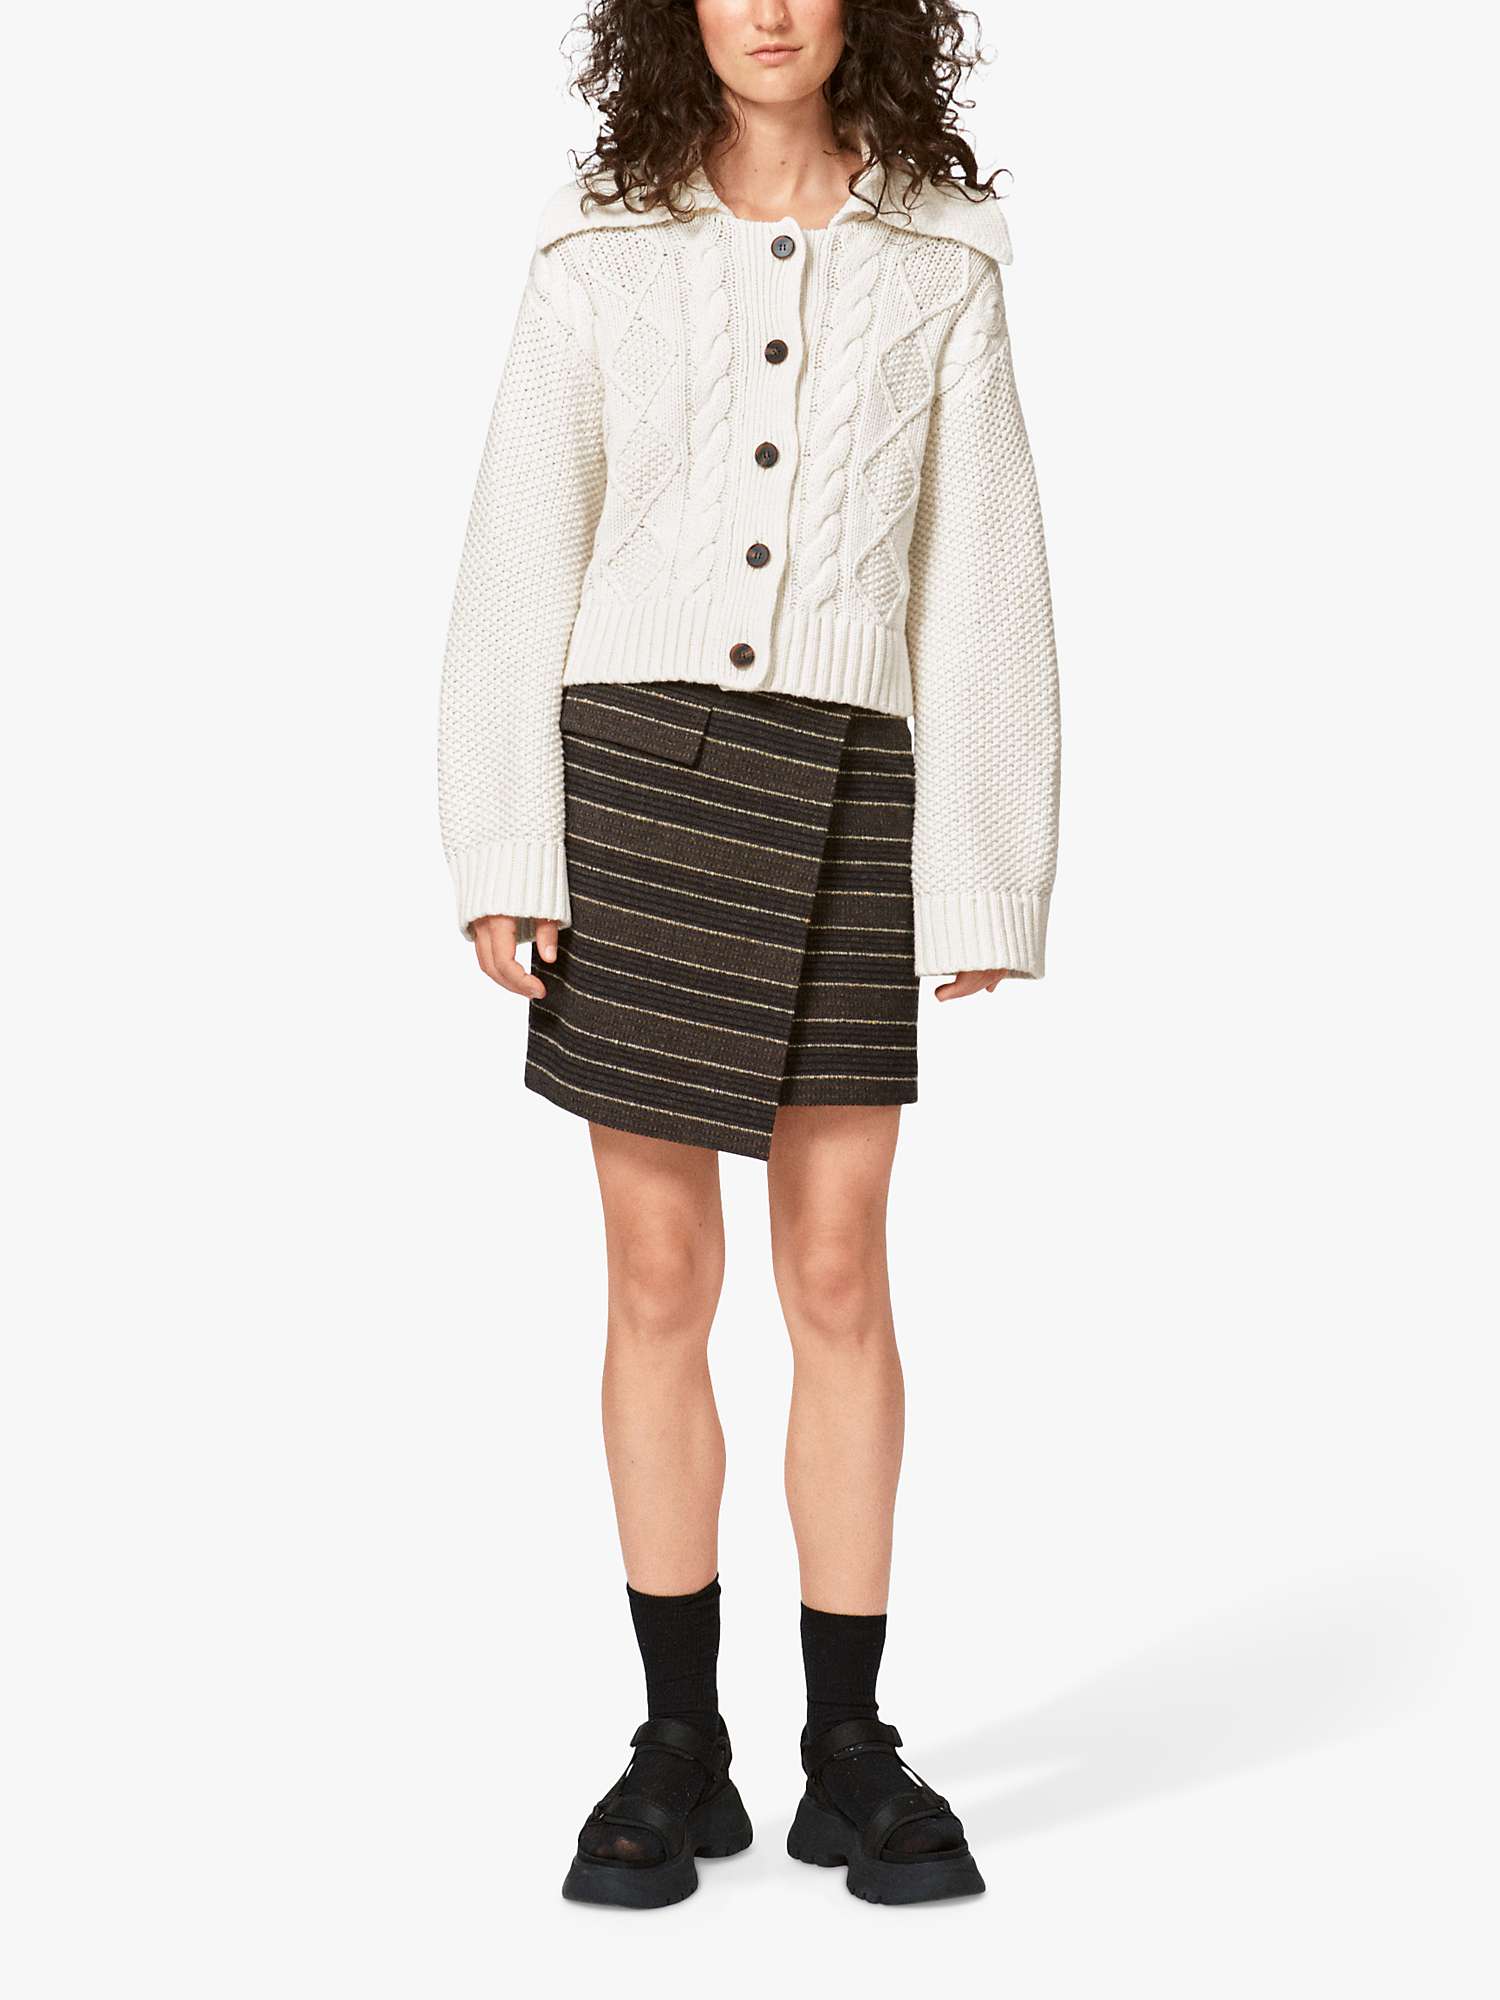 Buy nué notes Samuel Chunky Cable Knit Cardigan, Egret Online at johnlewis.com